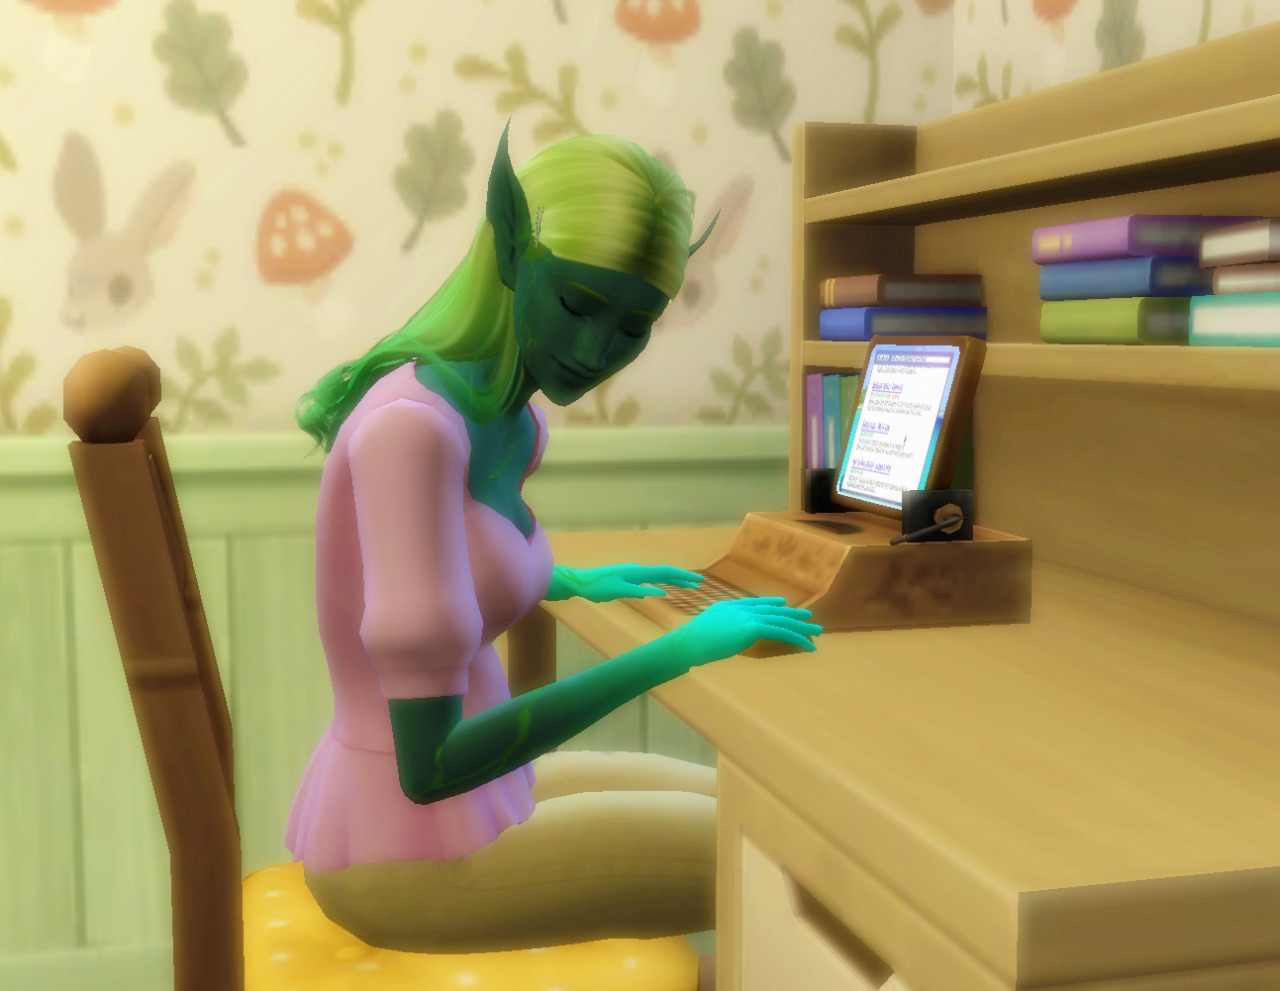 Dragonfly turned blue for a bit. No idea why. #my post#ts4 #the sims 4 #sims 4#simblr #berry sweet sims #rotational save